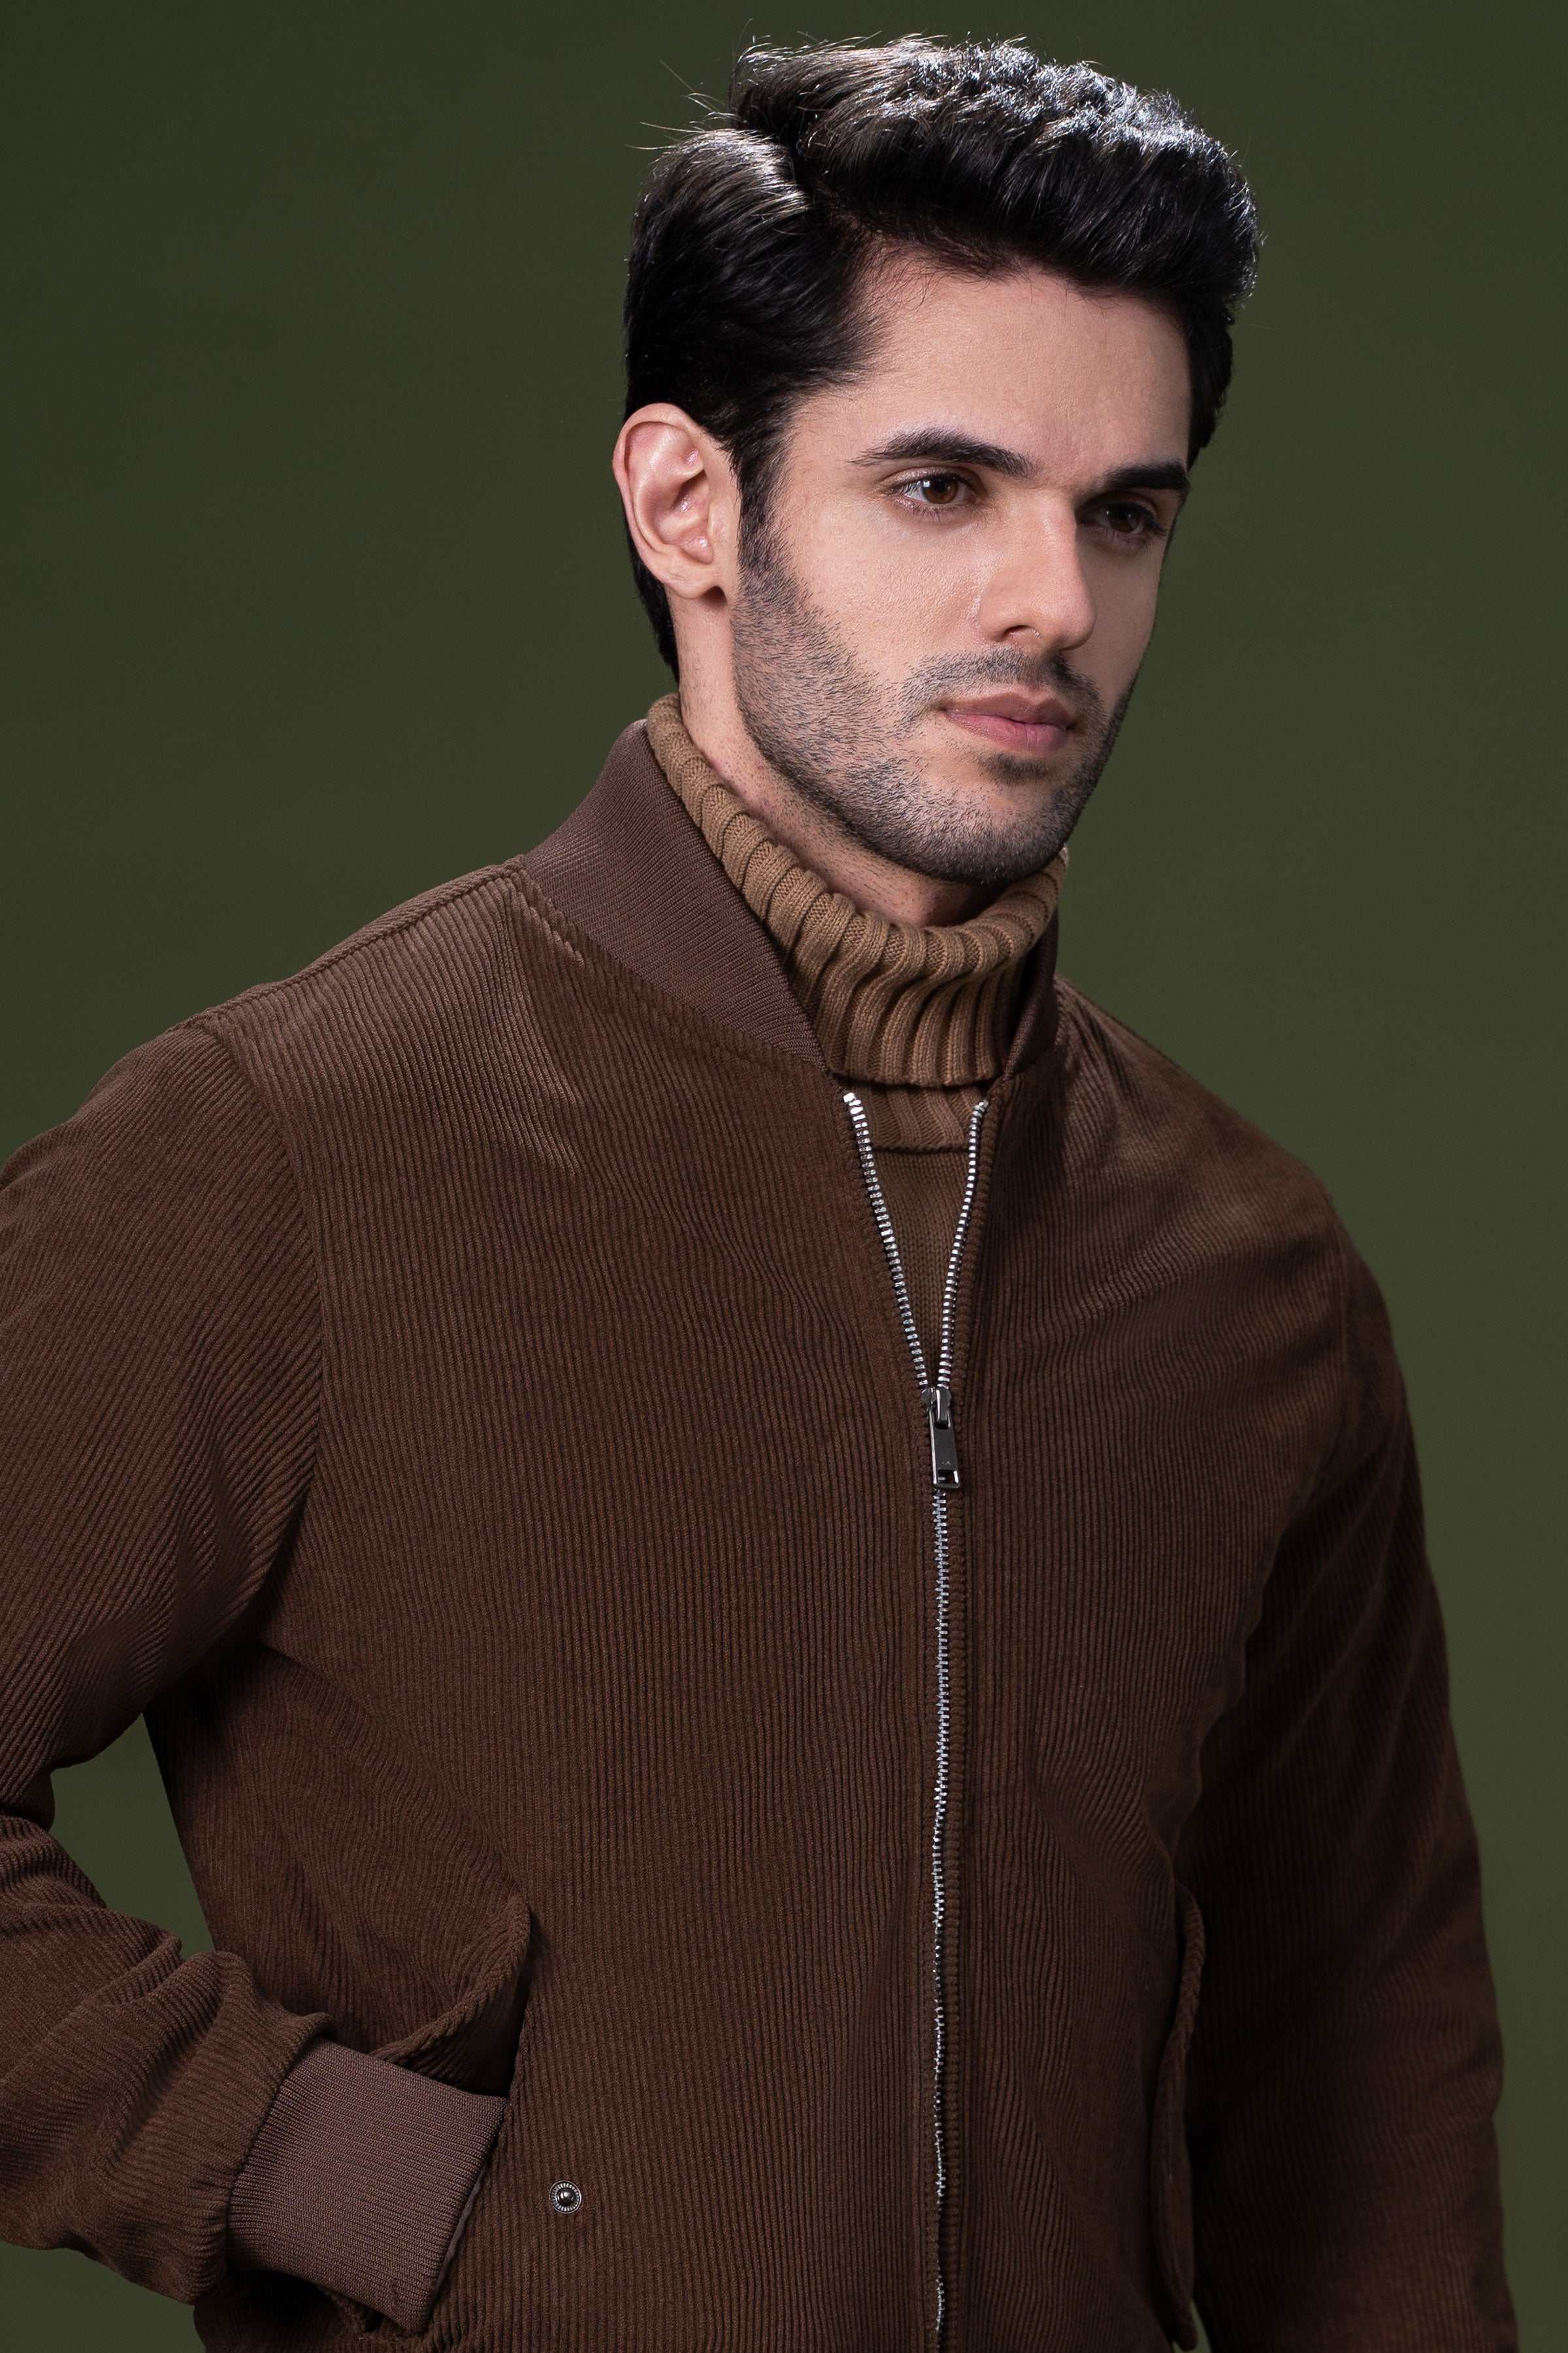 CORDUROY JACKET BROWN at Charcoal Clothing